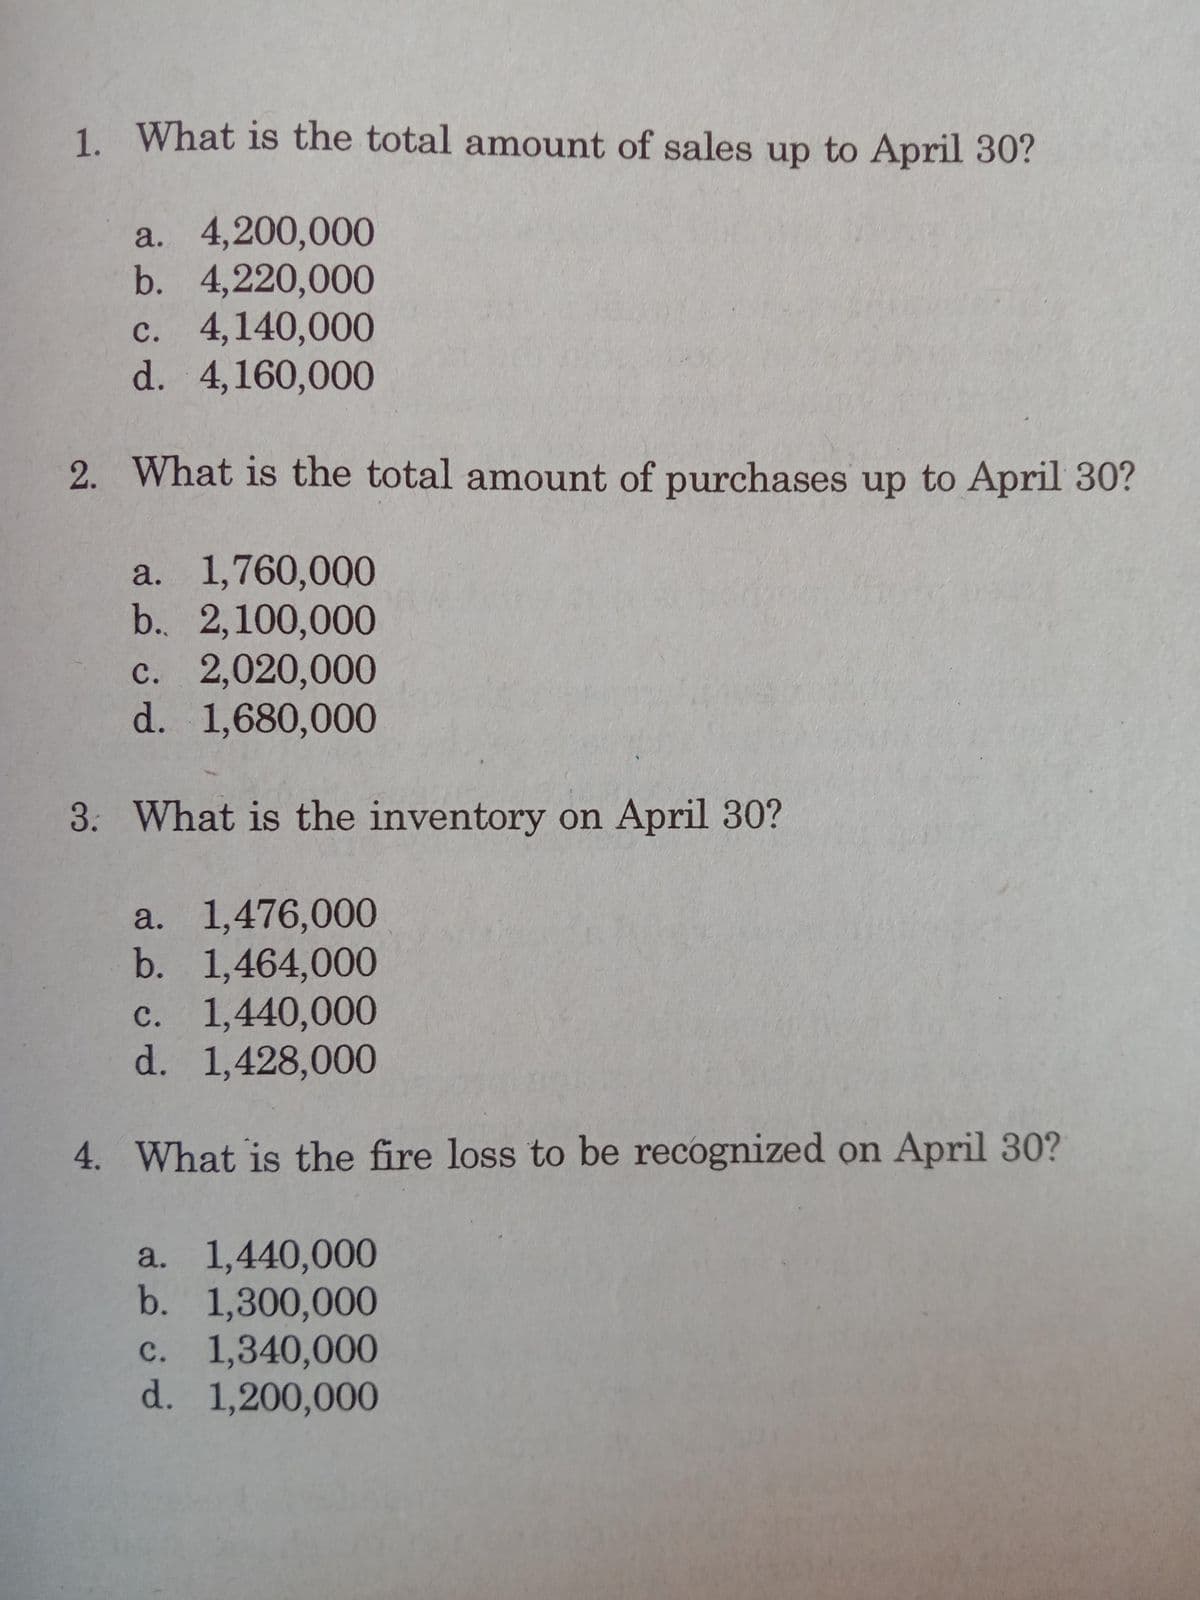 1. What is the total amount of sales up to April 30?
a. 4,200,000
b. 4,220,000
c. 4,140,000
d. 4,160,000
2. What is the total amount of purchases up to April 30?
a. 1,760,000
b. 2,100,000
с. 2,020,000
d. 1,680,000
3. What is the inventory on April 30?
a. 1,476,000
b. 1,464,000
c. 1,440,000
d. 1,428,000
4. What is the fire loss to be recognized on April 30?
a. 1,440,000
b. 1,300,000
c. 1,340,000
d. 1,200,000
